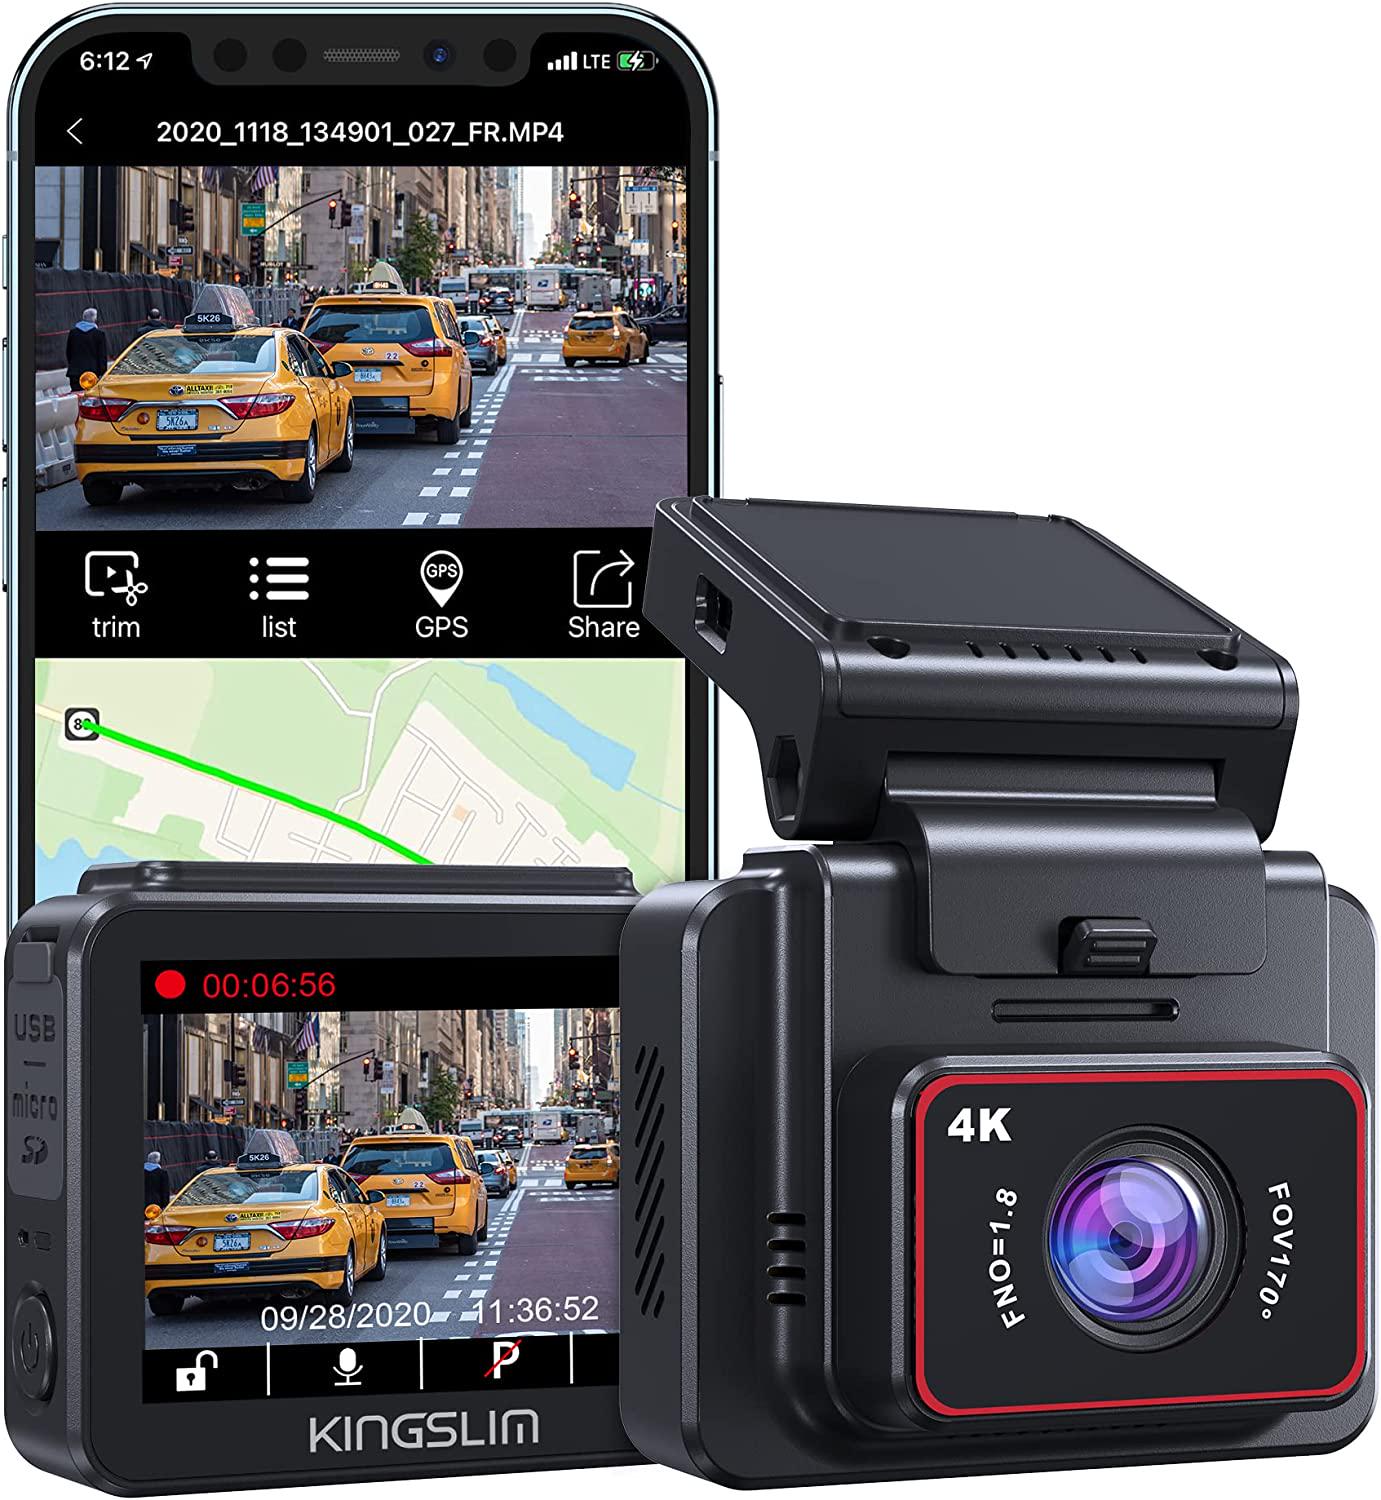 Kingslim, Kingslim D5-4K Dash Cam with WiFi - Front Dash Camera for Cars with GPS and Speed, Sony Night Vision, Support APP and 256GB Max